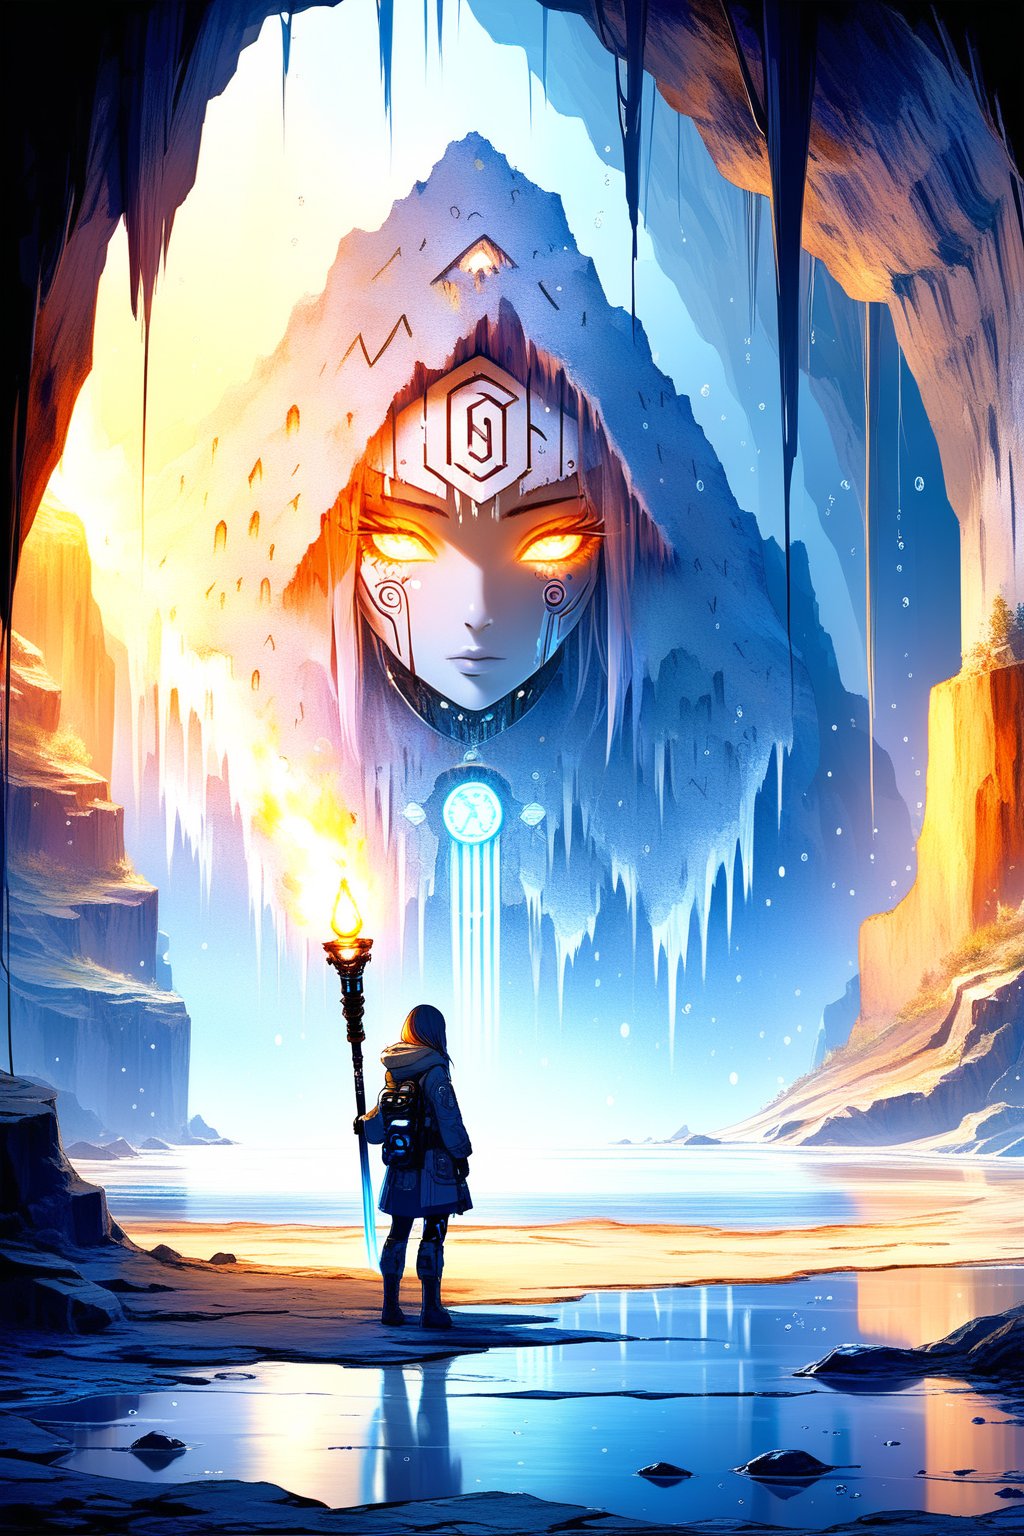 DonMW15pXL, cyborg style, girl explorer inside a cave holding a torch, observing the wall, ancient runic letters, cave, water drops, stalactites and stalactites, masterpiece, wallpaper,